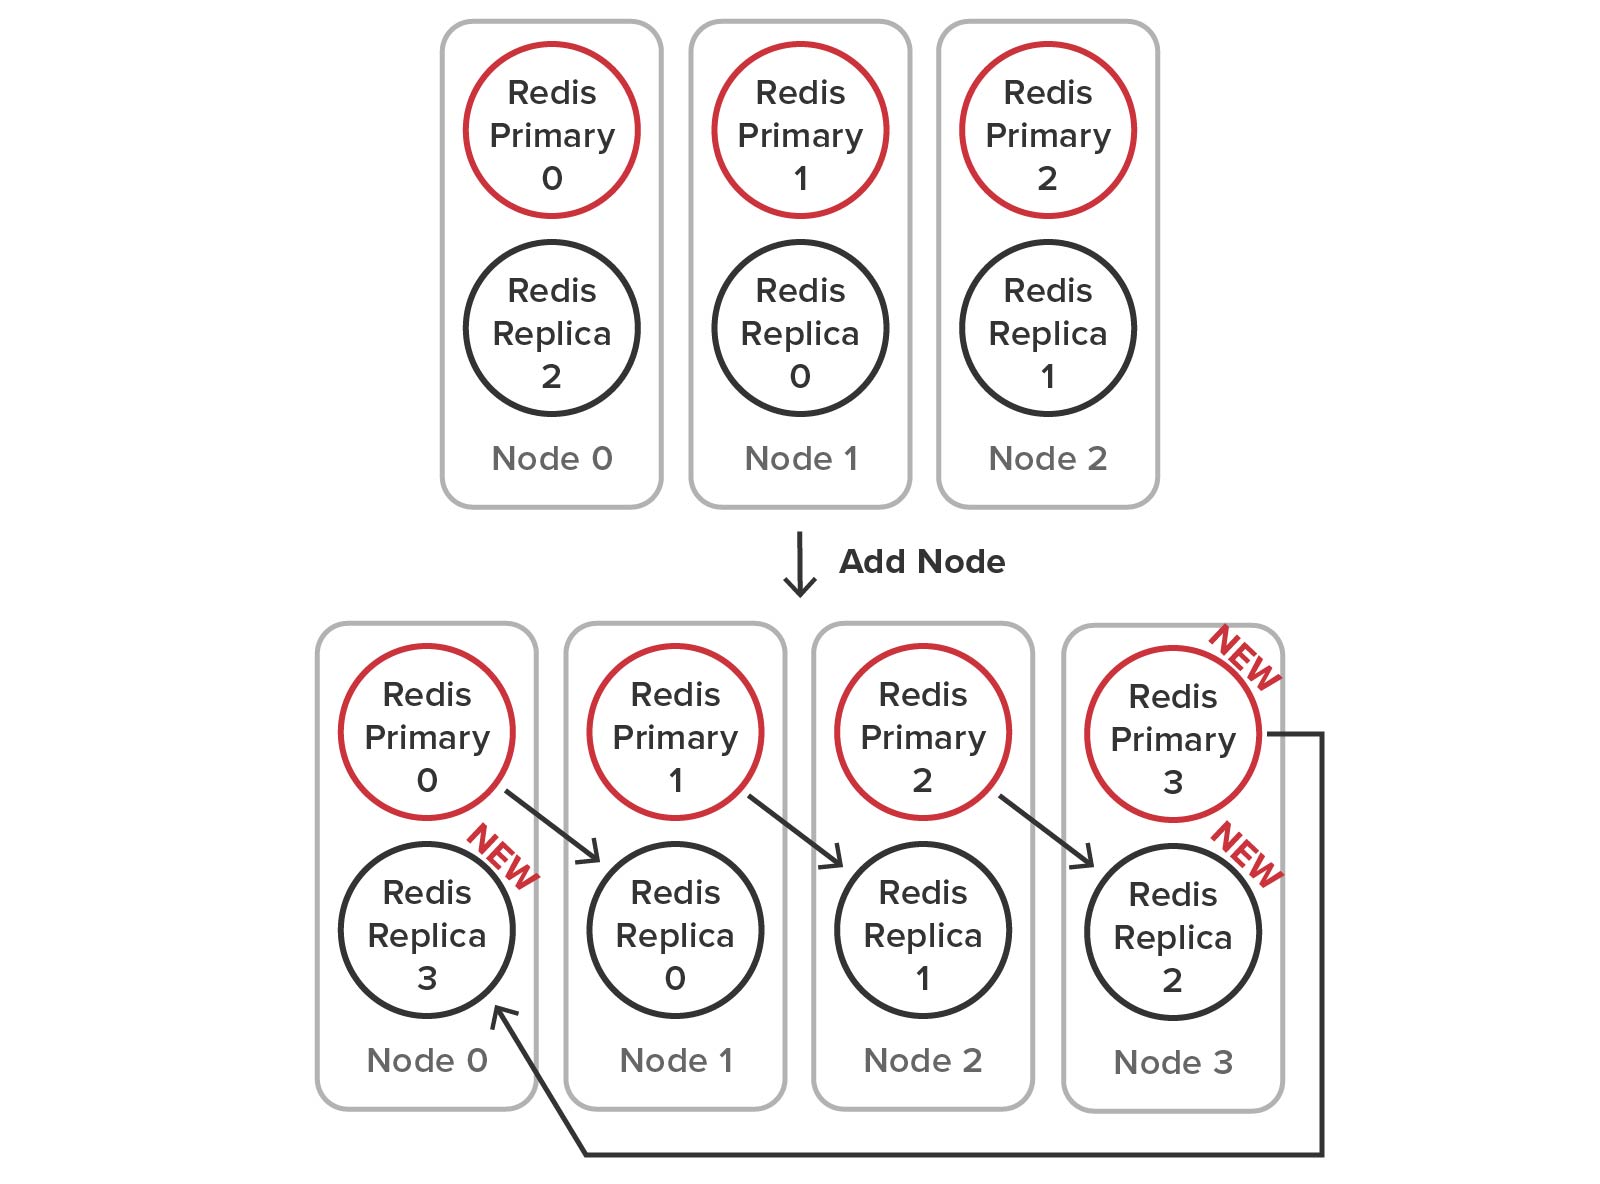 Adding a node to Redis requires adding primary and replica processes, moving a replica from another node, and resharding the cluster.